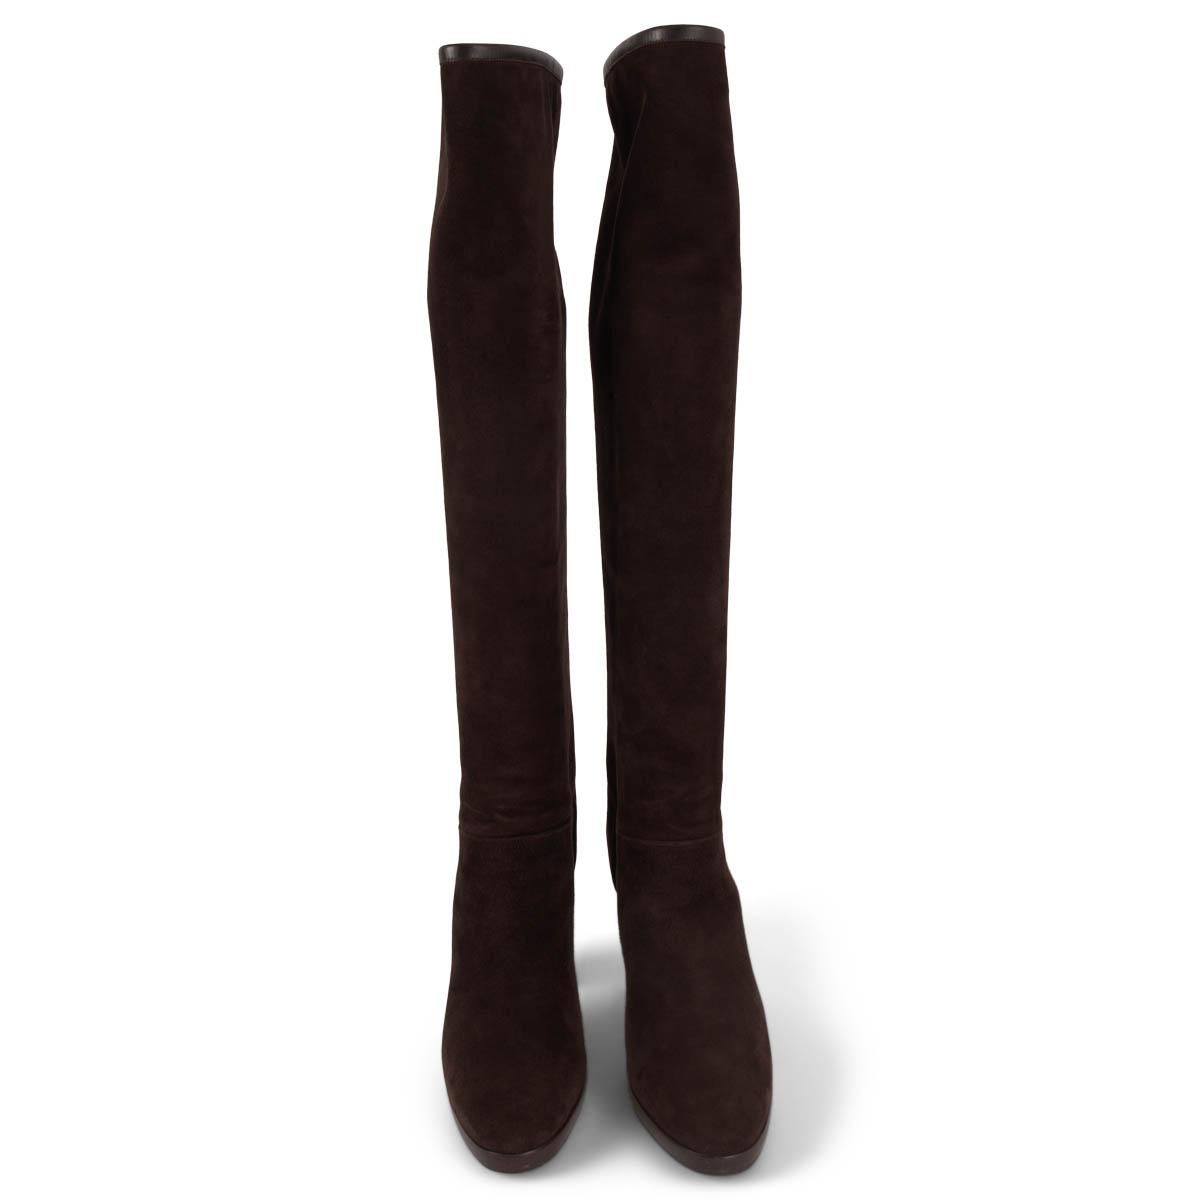 100% authentic Loro Piana Thador knee high boots in brown suede with brown leather trim. The design features a stacked heel and platform. Lined in brown cashmere. Have been worn and are in excellent condition. 

Measurements
Imprinted Size	37.5
Shoe